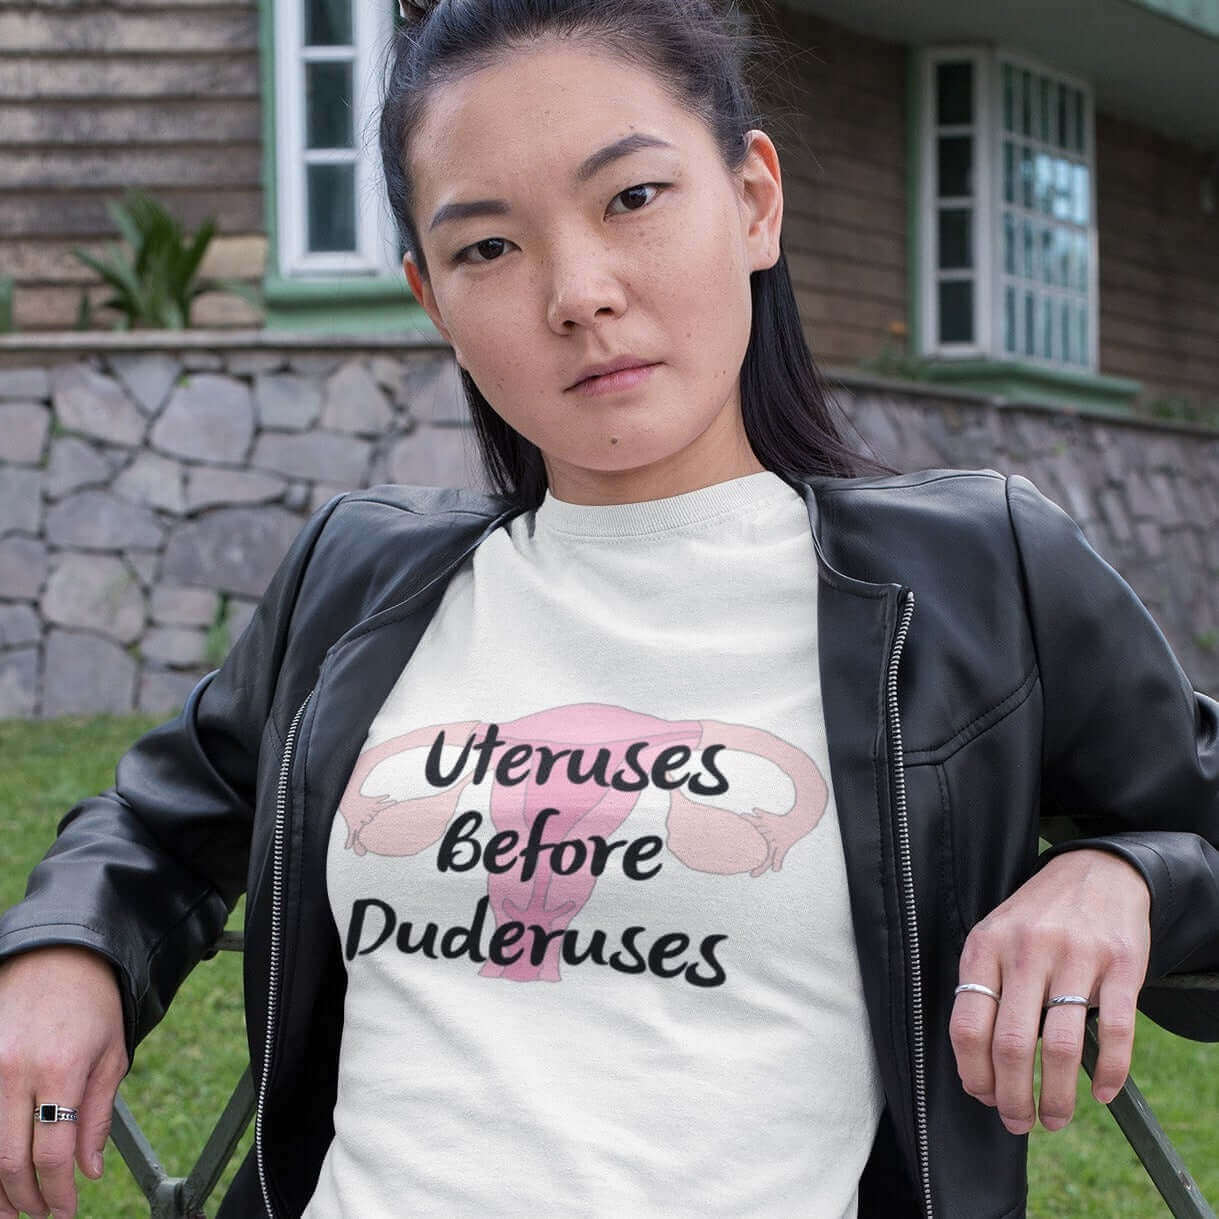 Woman leaning against a fence wearing a white t-shirt with image of a uterus and the words Uteruses before duderuses printed on the front.